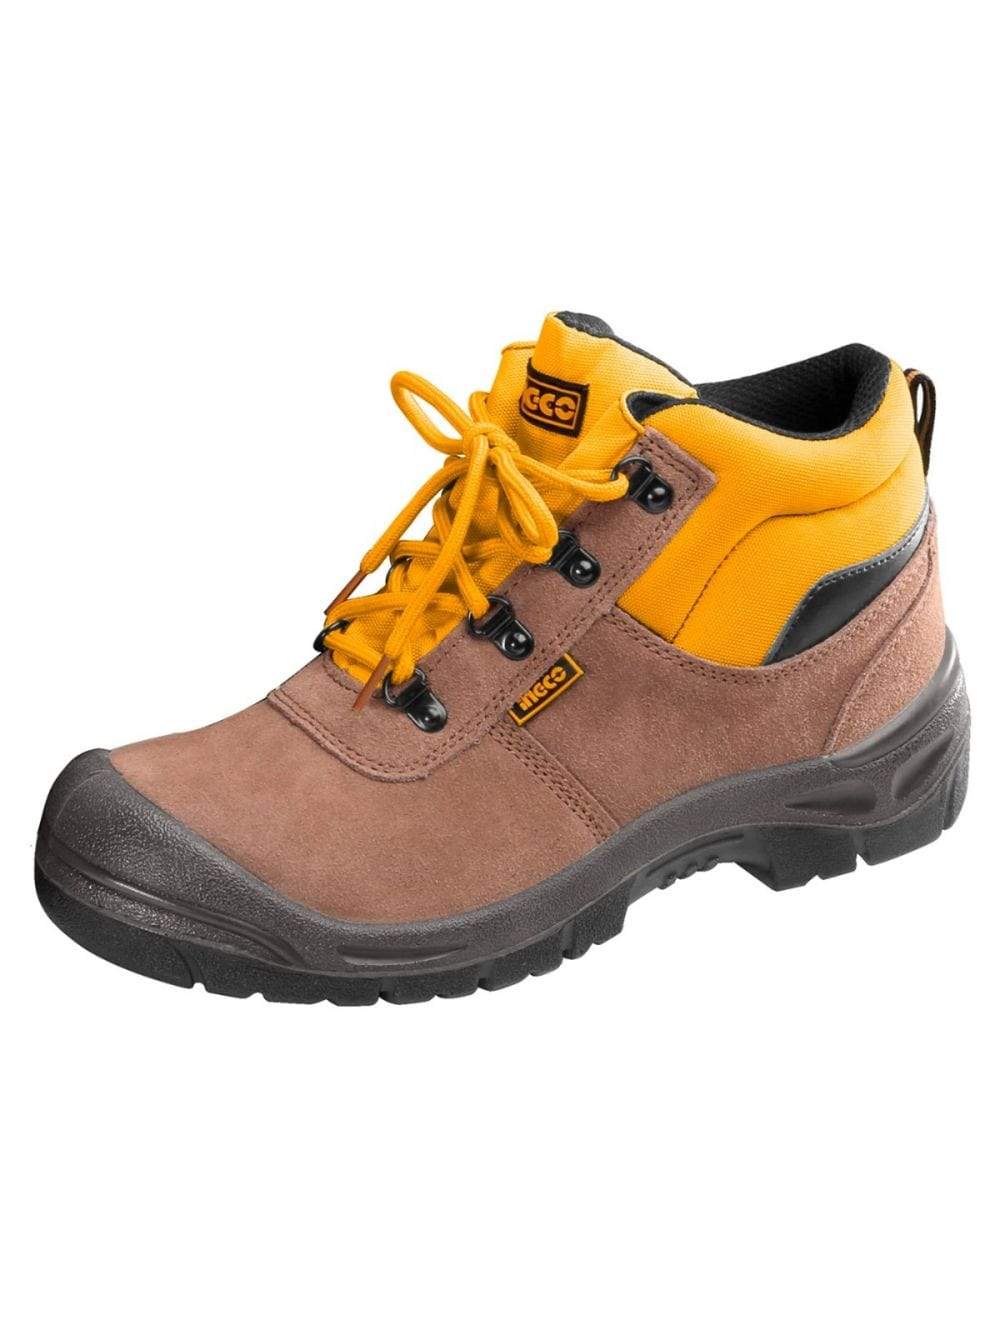 Ingco Safety Boots - SSH04SB | Supply Master | Accra, Ghana Tools Building Steel Engineering Hardware tool